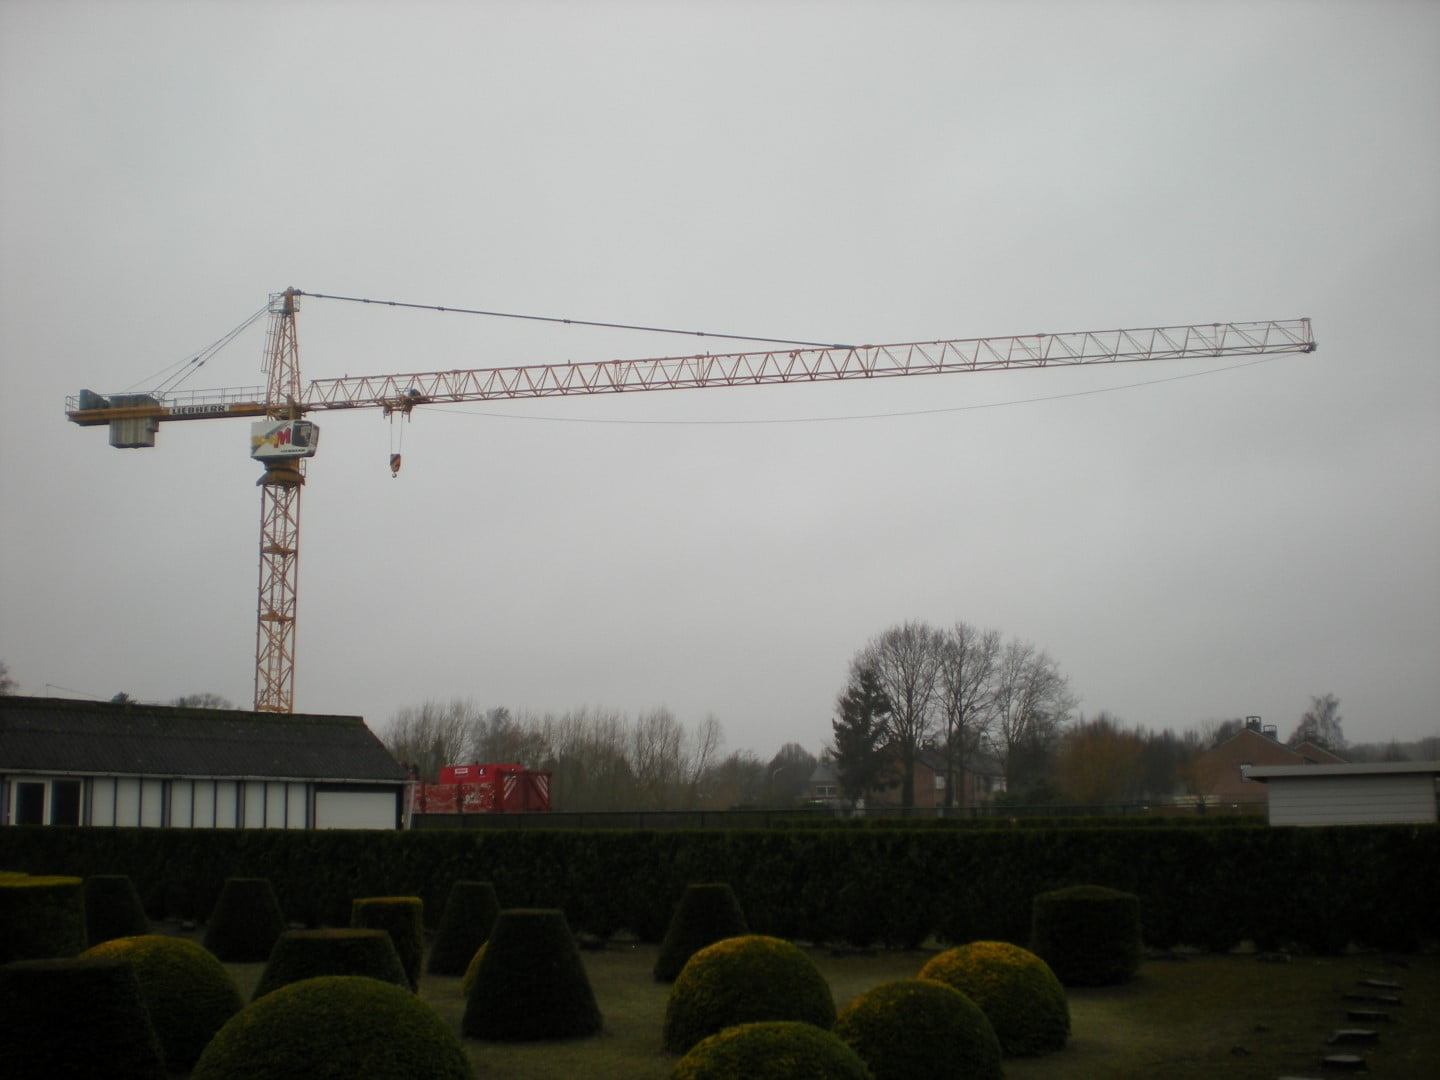 Second-hand tower crane type 200 EC-HM 10 FR.tronic for the company Christiaens at Oostkamp